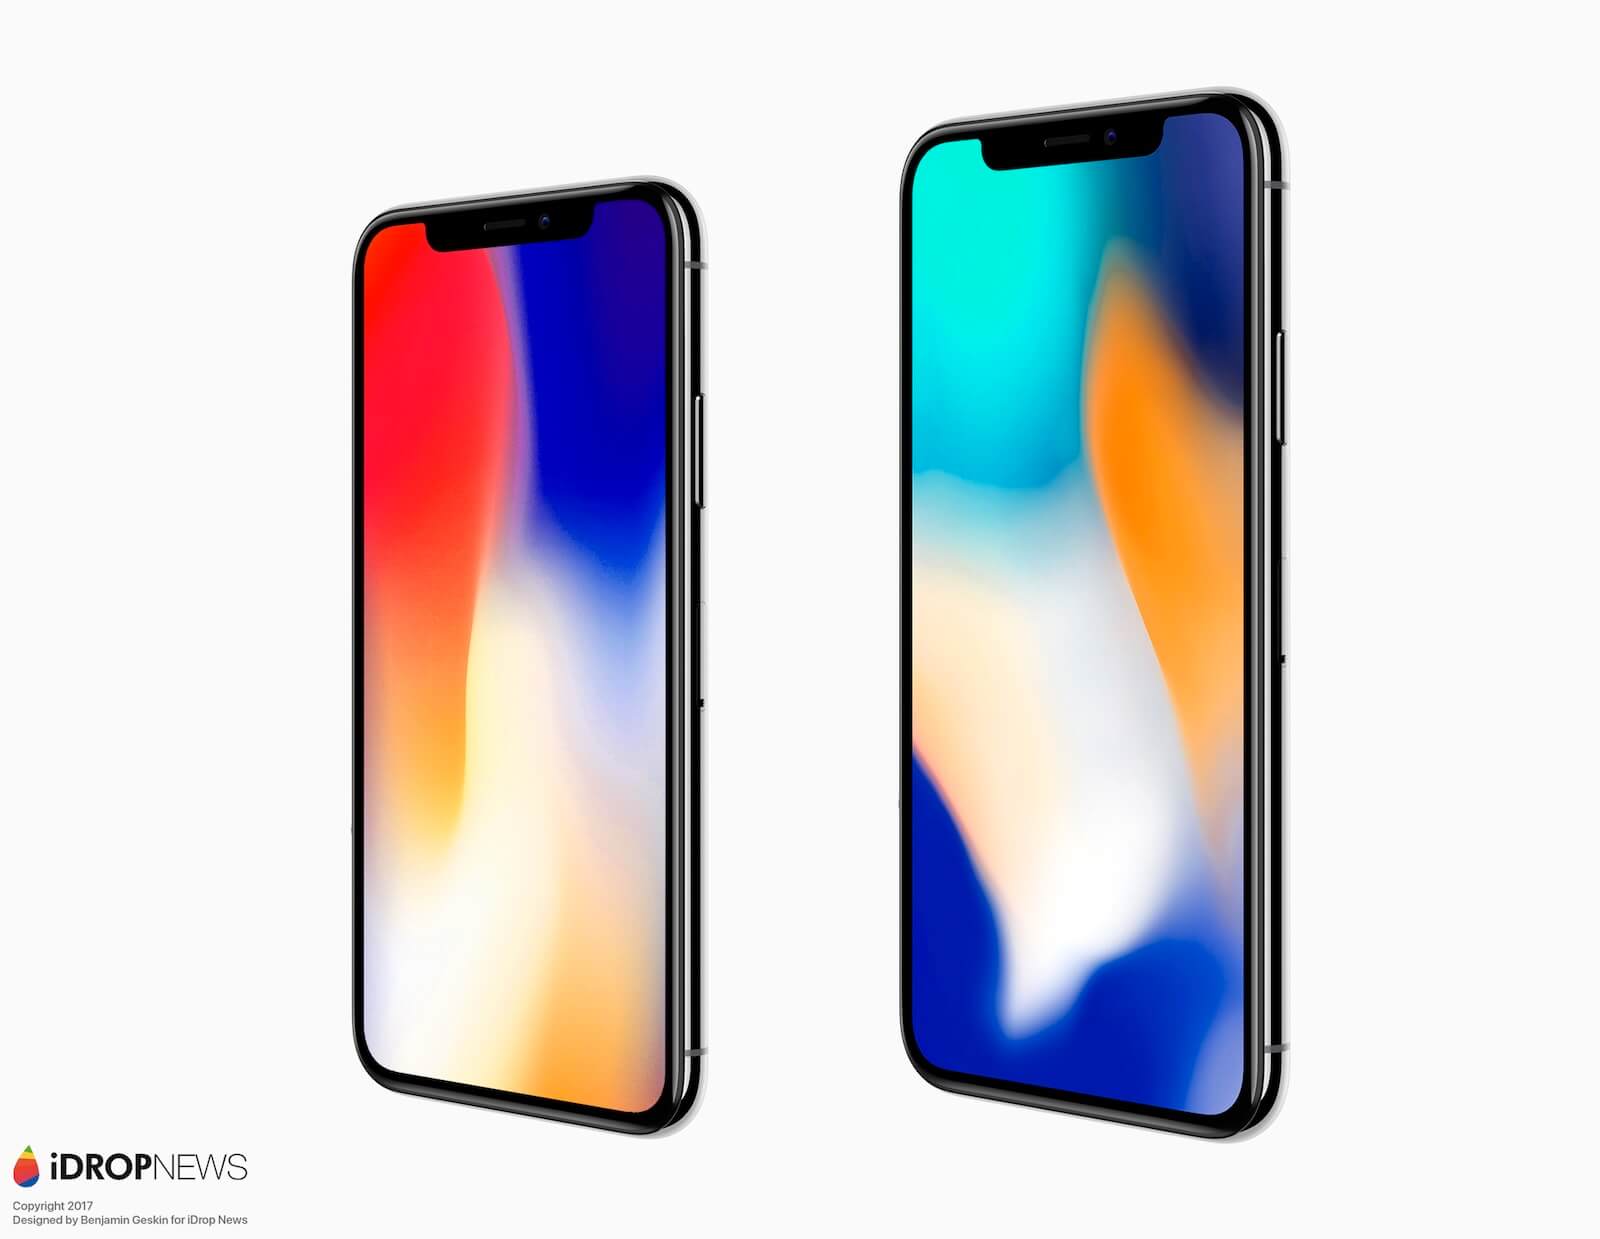 Iphone X Plus Release Date - Iphone X Plus Xs X2 Iphone 9 Exactly What ...